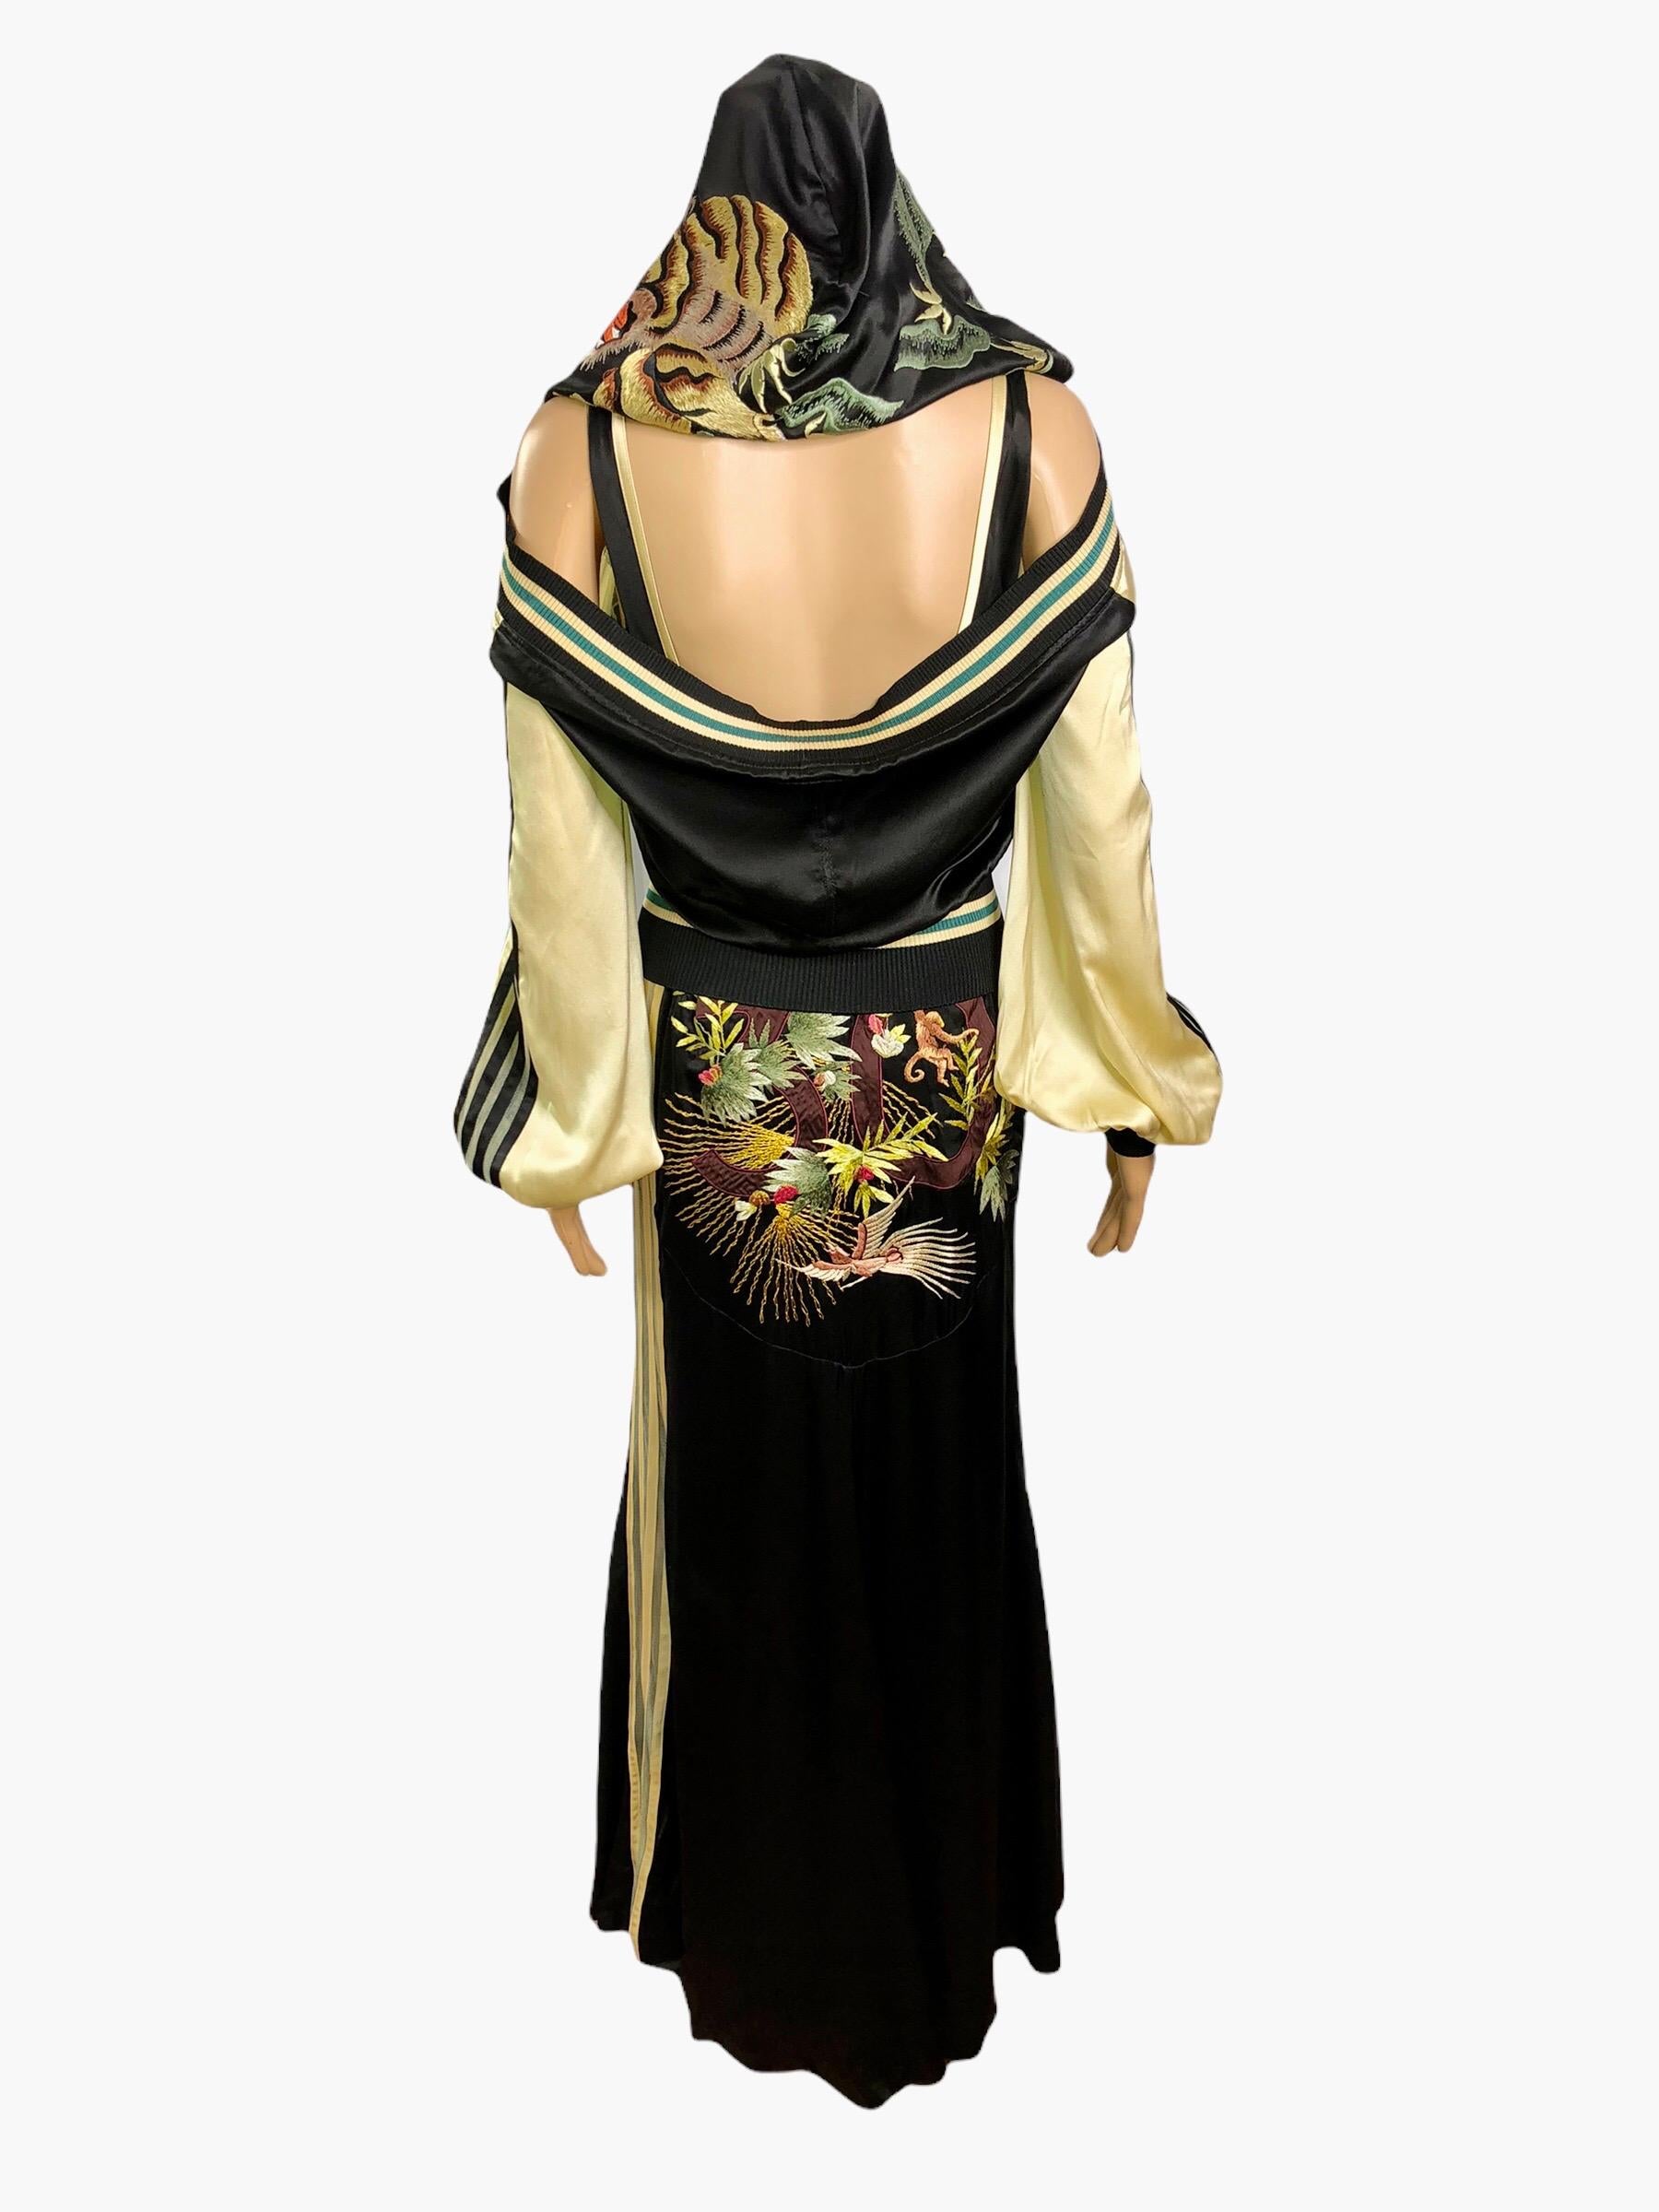 Jean Paul Gaultier S/S 2007 Runway Embroidered Silk Dress & Jacket 2 Piece Set  For Sale 1